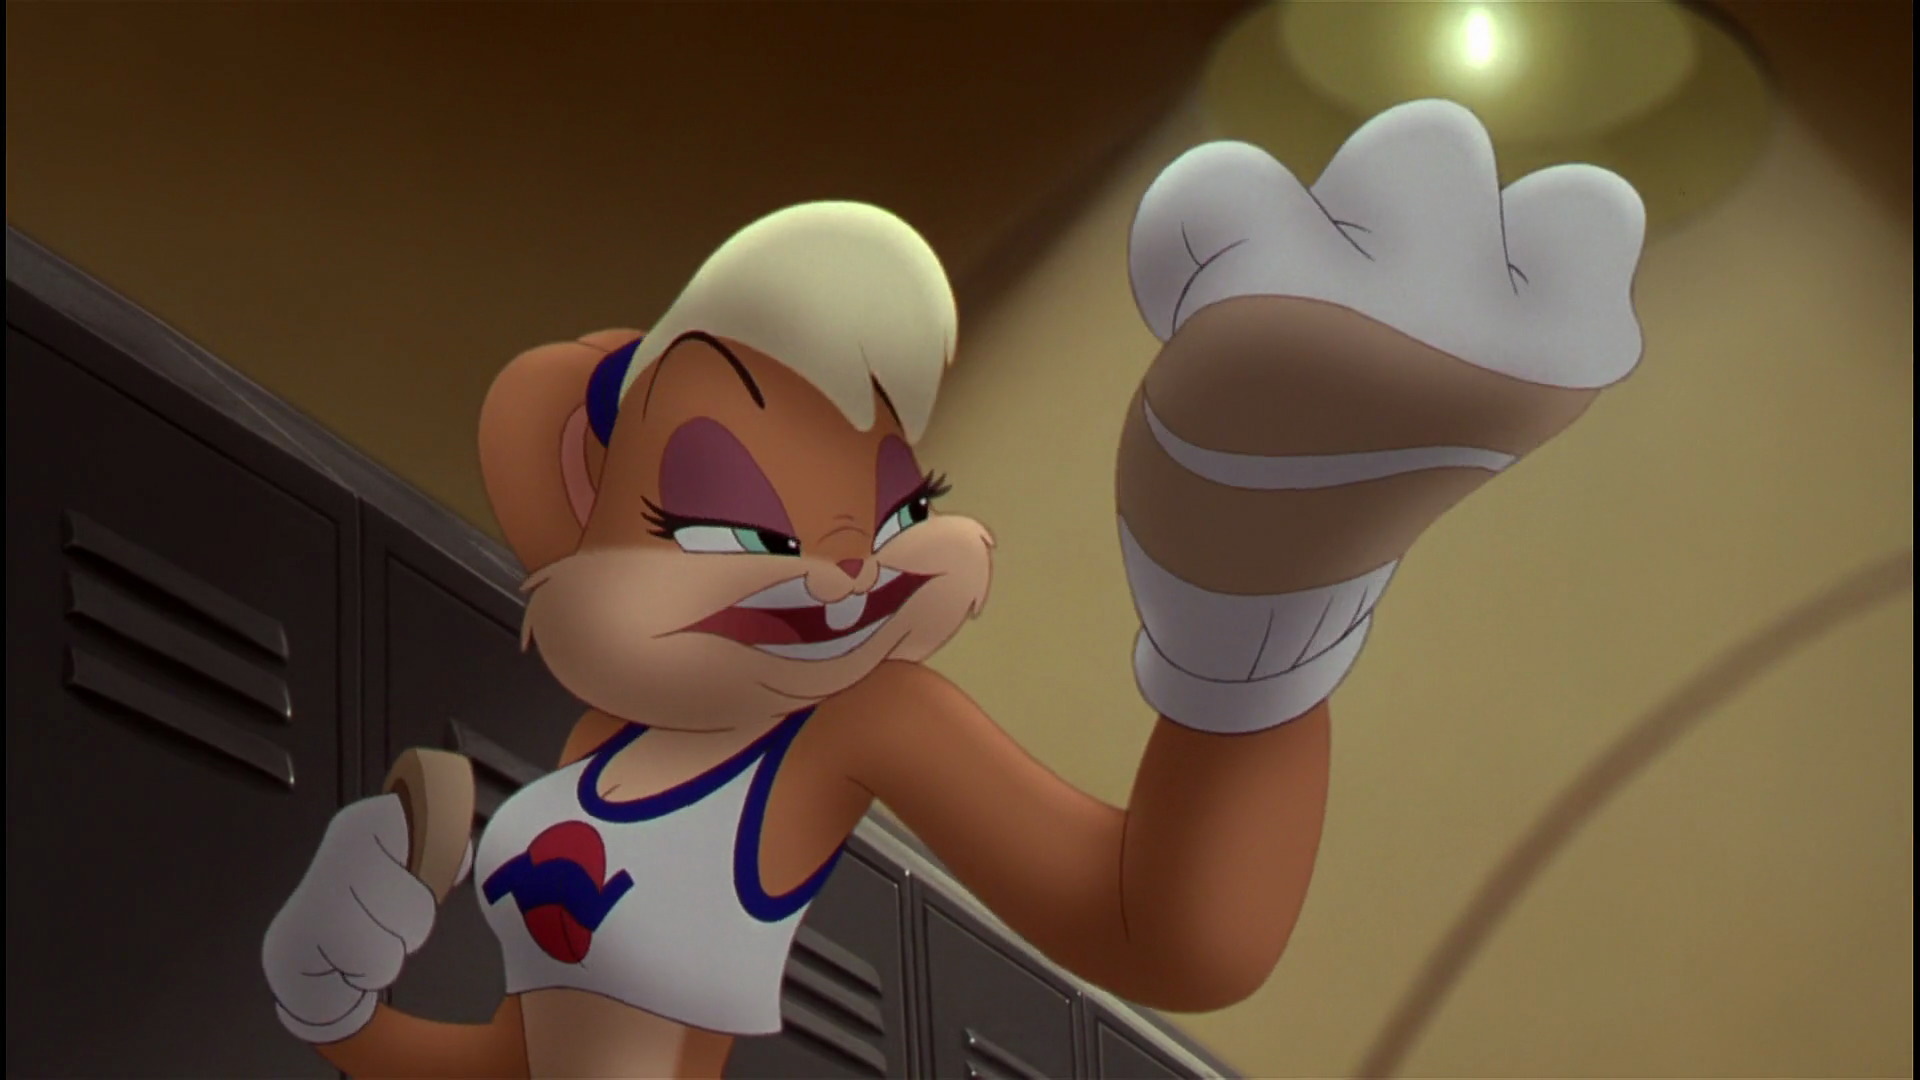 Which Is Your प्रिय Version Of Lola Bunny From The Looney Tunes